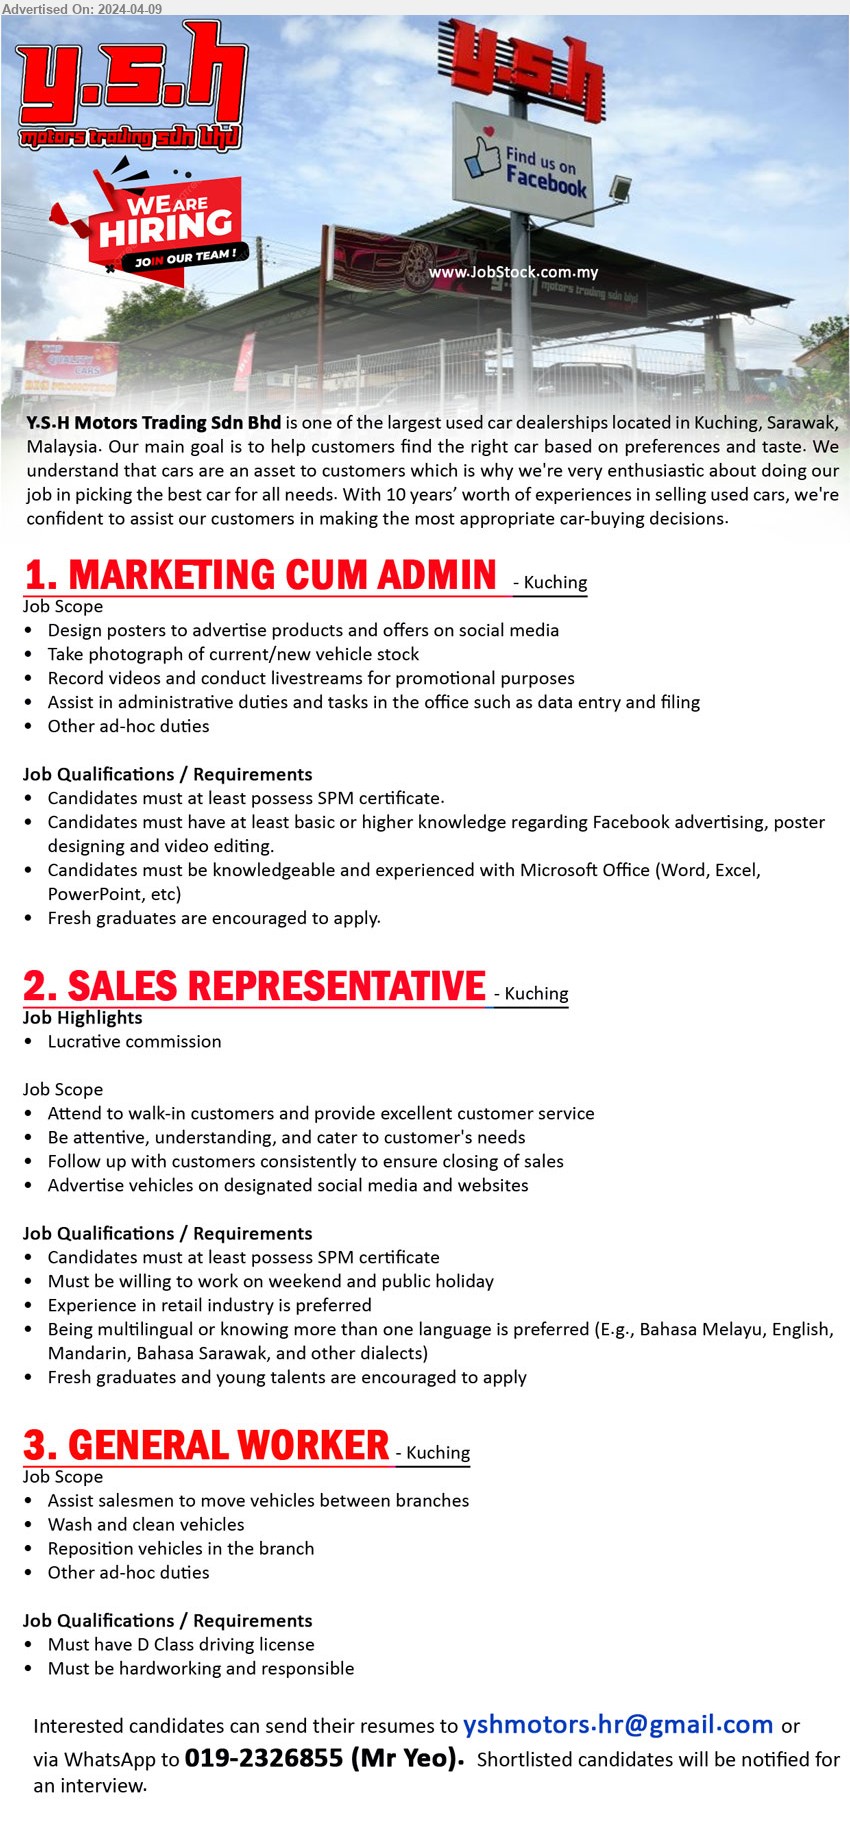 Y.S.H MOTORS TRADING SDN BHD - 1. MARKETING CUM ADMIN (Kuching), SPM, Candidates must have at least basic or higher knowledge regarding Facebook advertising, poster designing and video editing.,...
2. SALES REPRESENTATIVE (Kuching), SPM, Experience in retail industry is preferred,...
3. GENERAL WORKER (Kuching), Must have D Class driving license, Must be hardworking and responsible,...
Call 019-2326855 / Email resume to ...